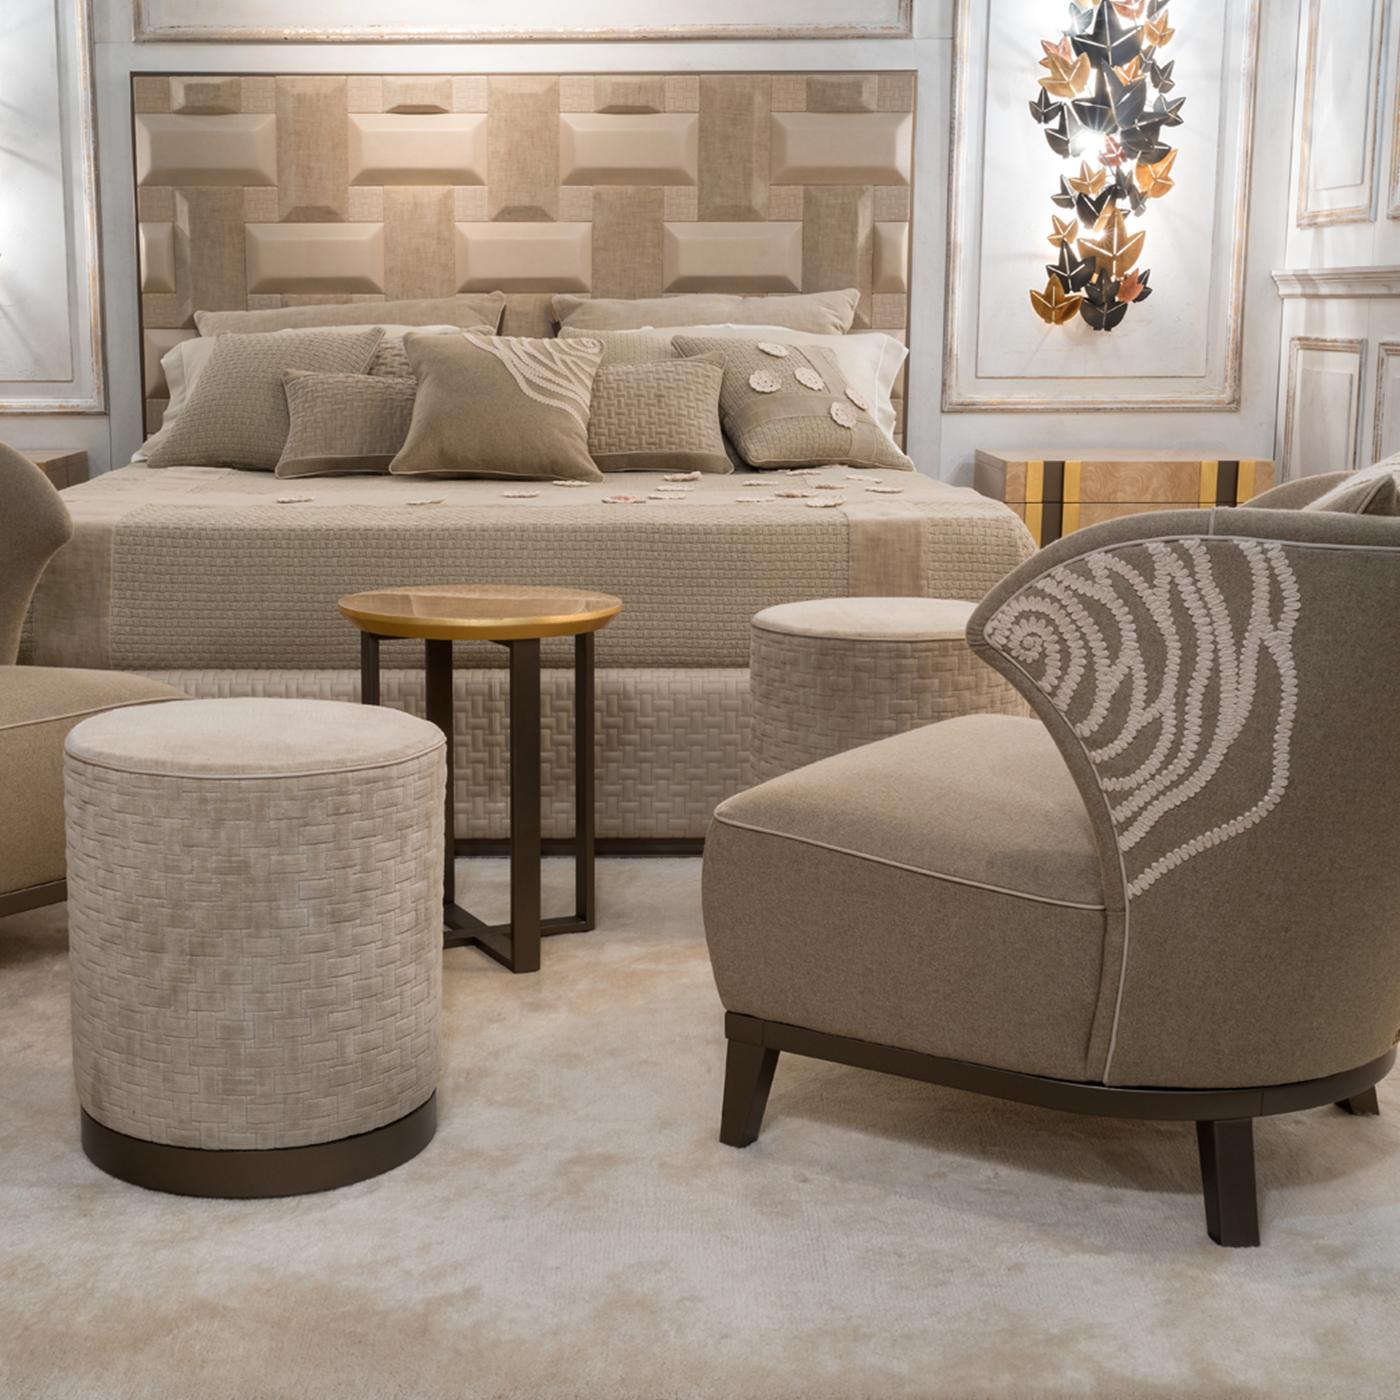 The Parigina Pouf by designers Marco and Giulio Mantellassi boasts a sleek cylindrical silhouette. Its padded seat is upholstered in versatile beige fabric, detailed with a textured motif for a woven effect. Supported by a sturdy bronzed steel base,